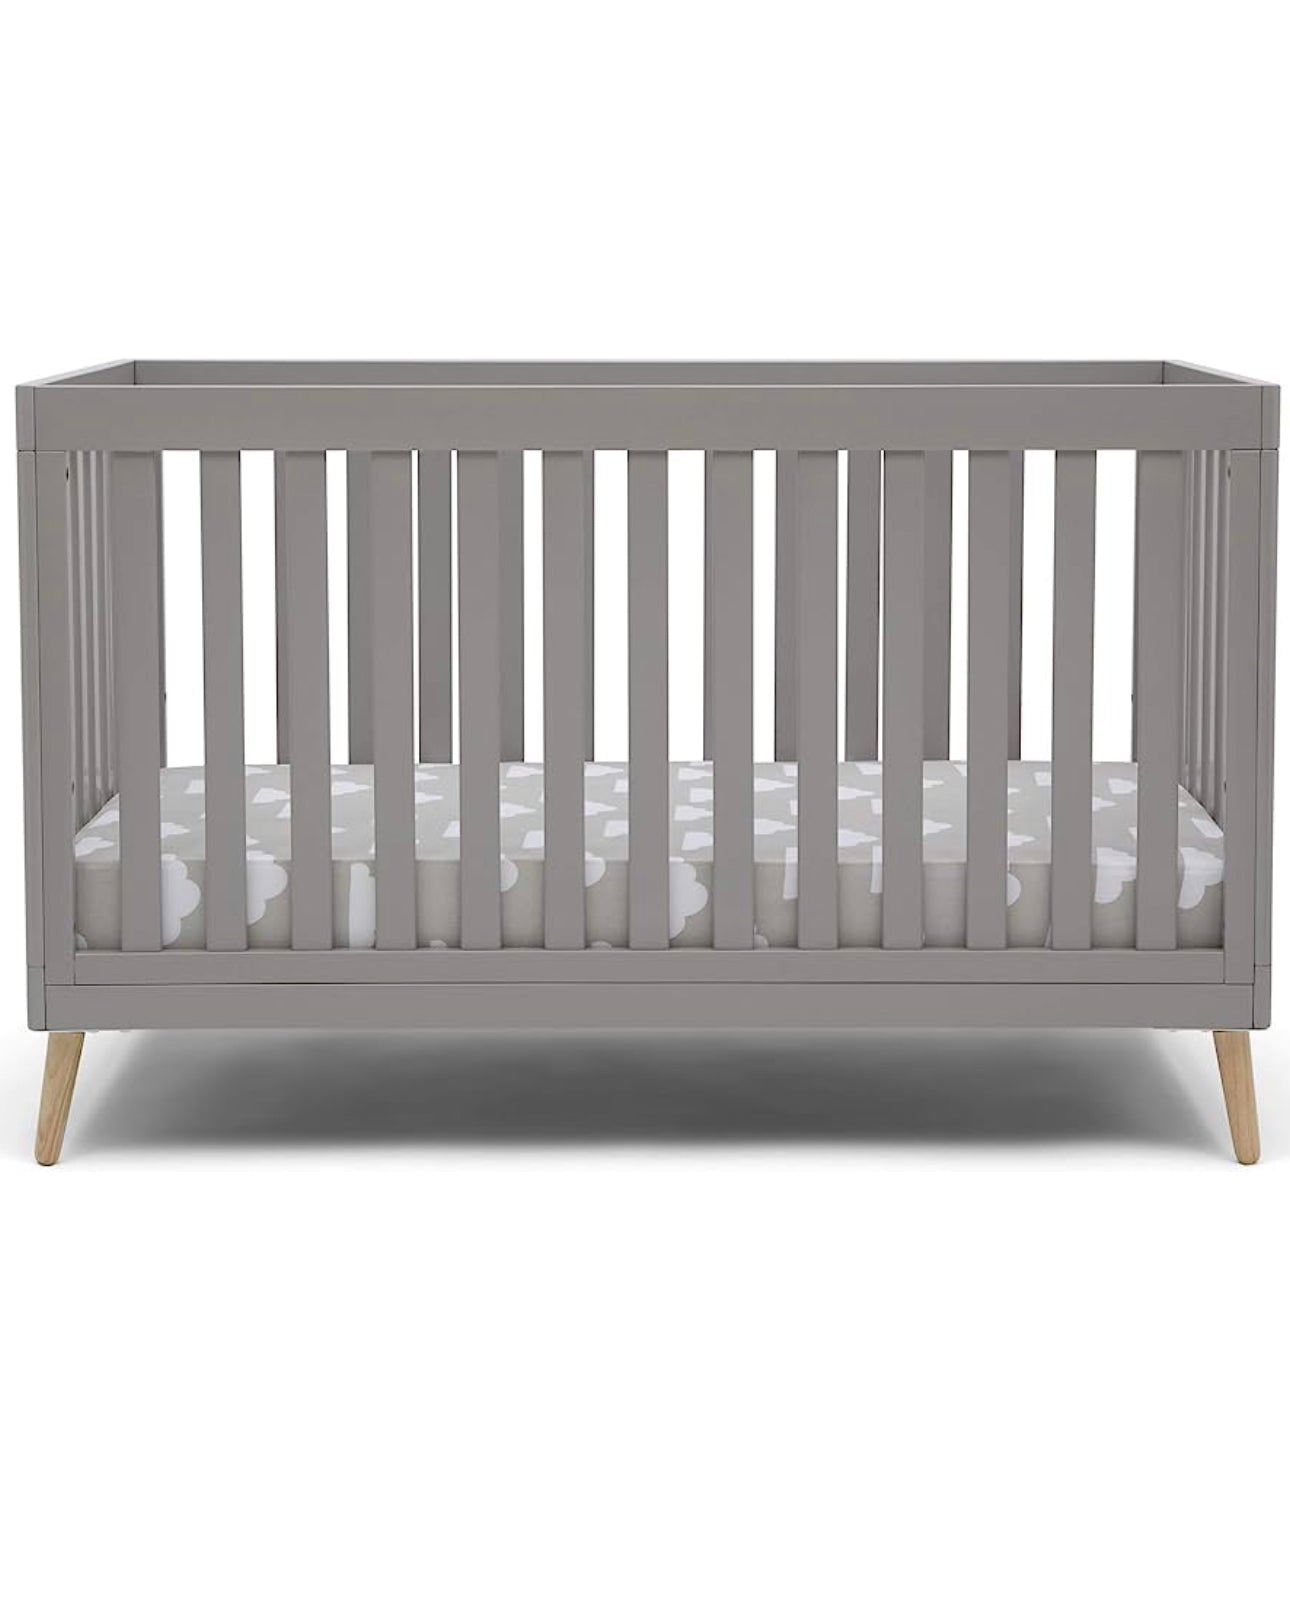 Children Essex 4-in-1 Convertible Baby Crib, with Natural Legs